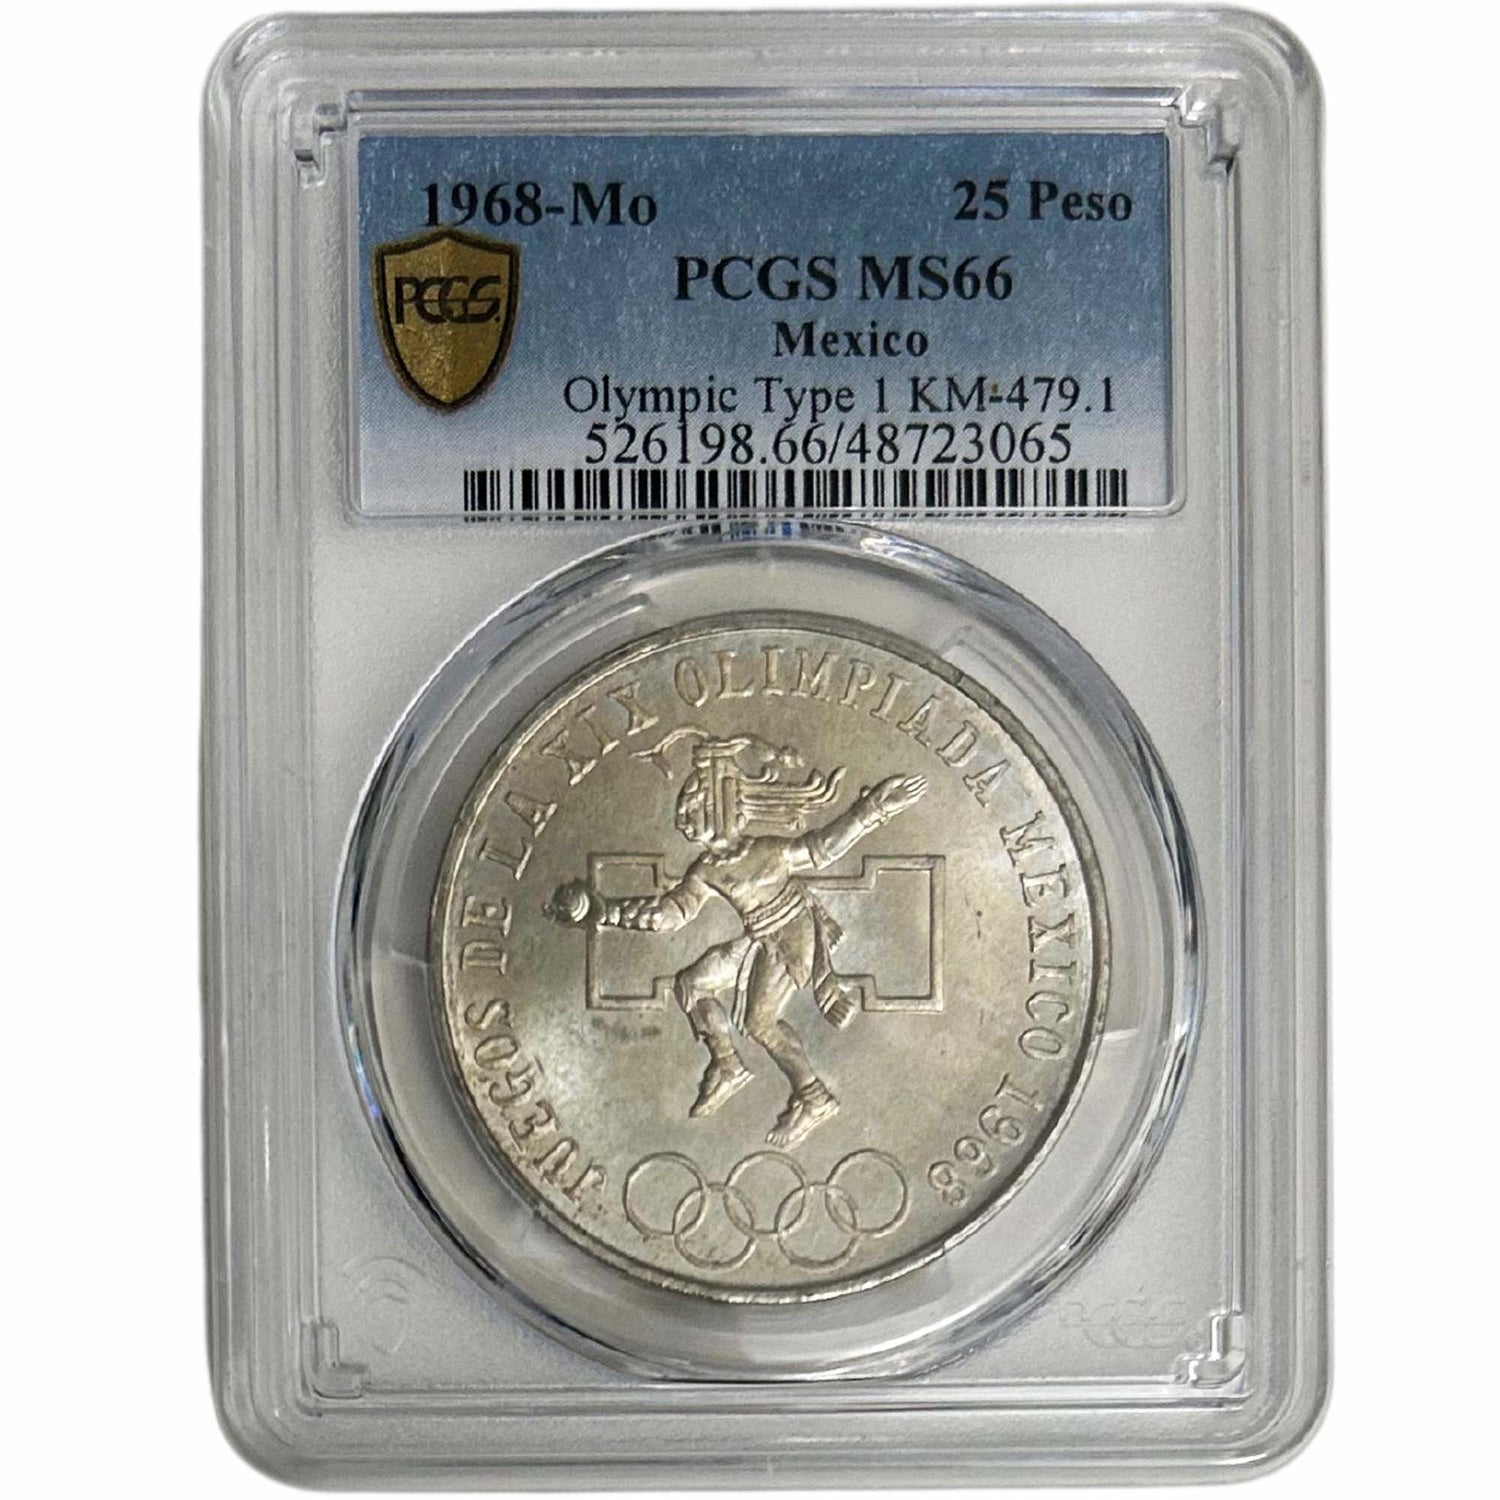 1968-Mo 25 Peso PCGS MS66 Olympic Type 1 KM-479 Front